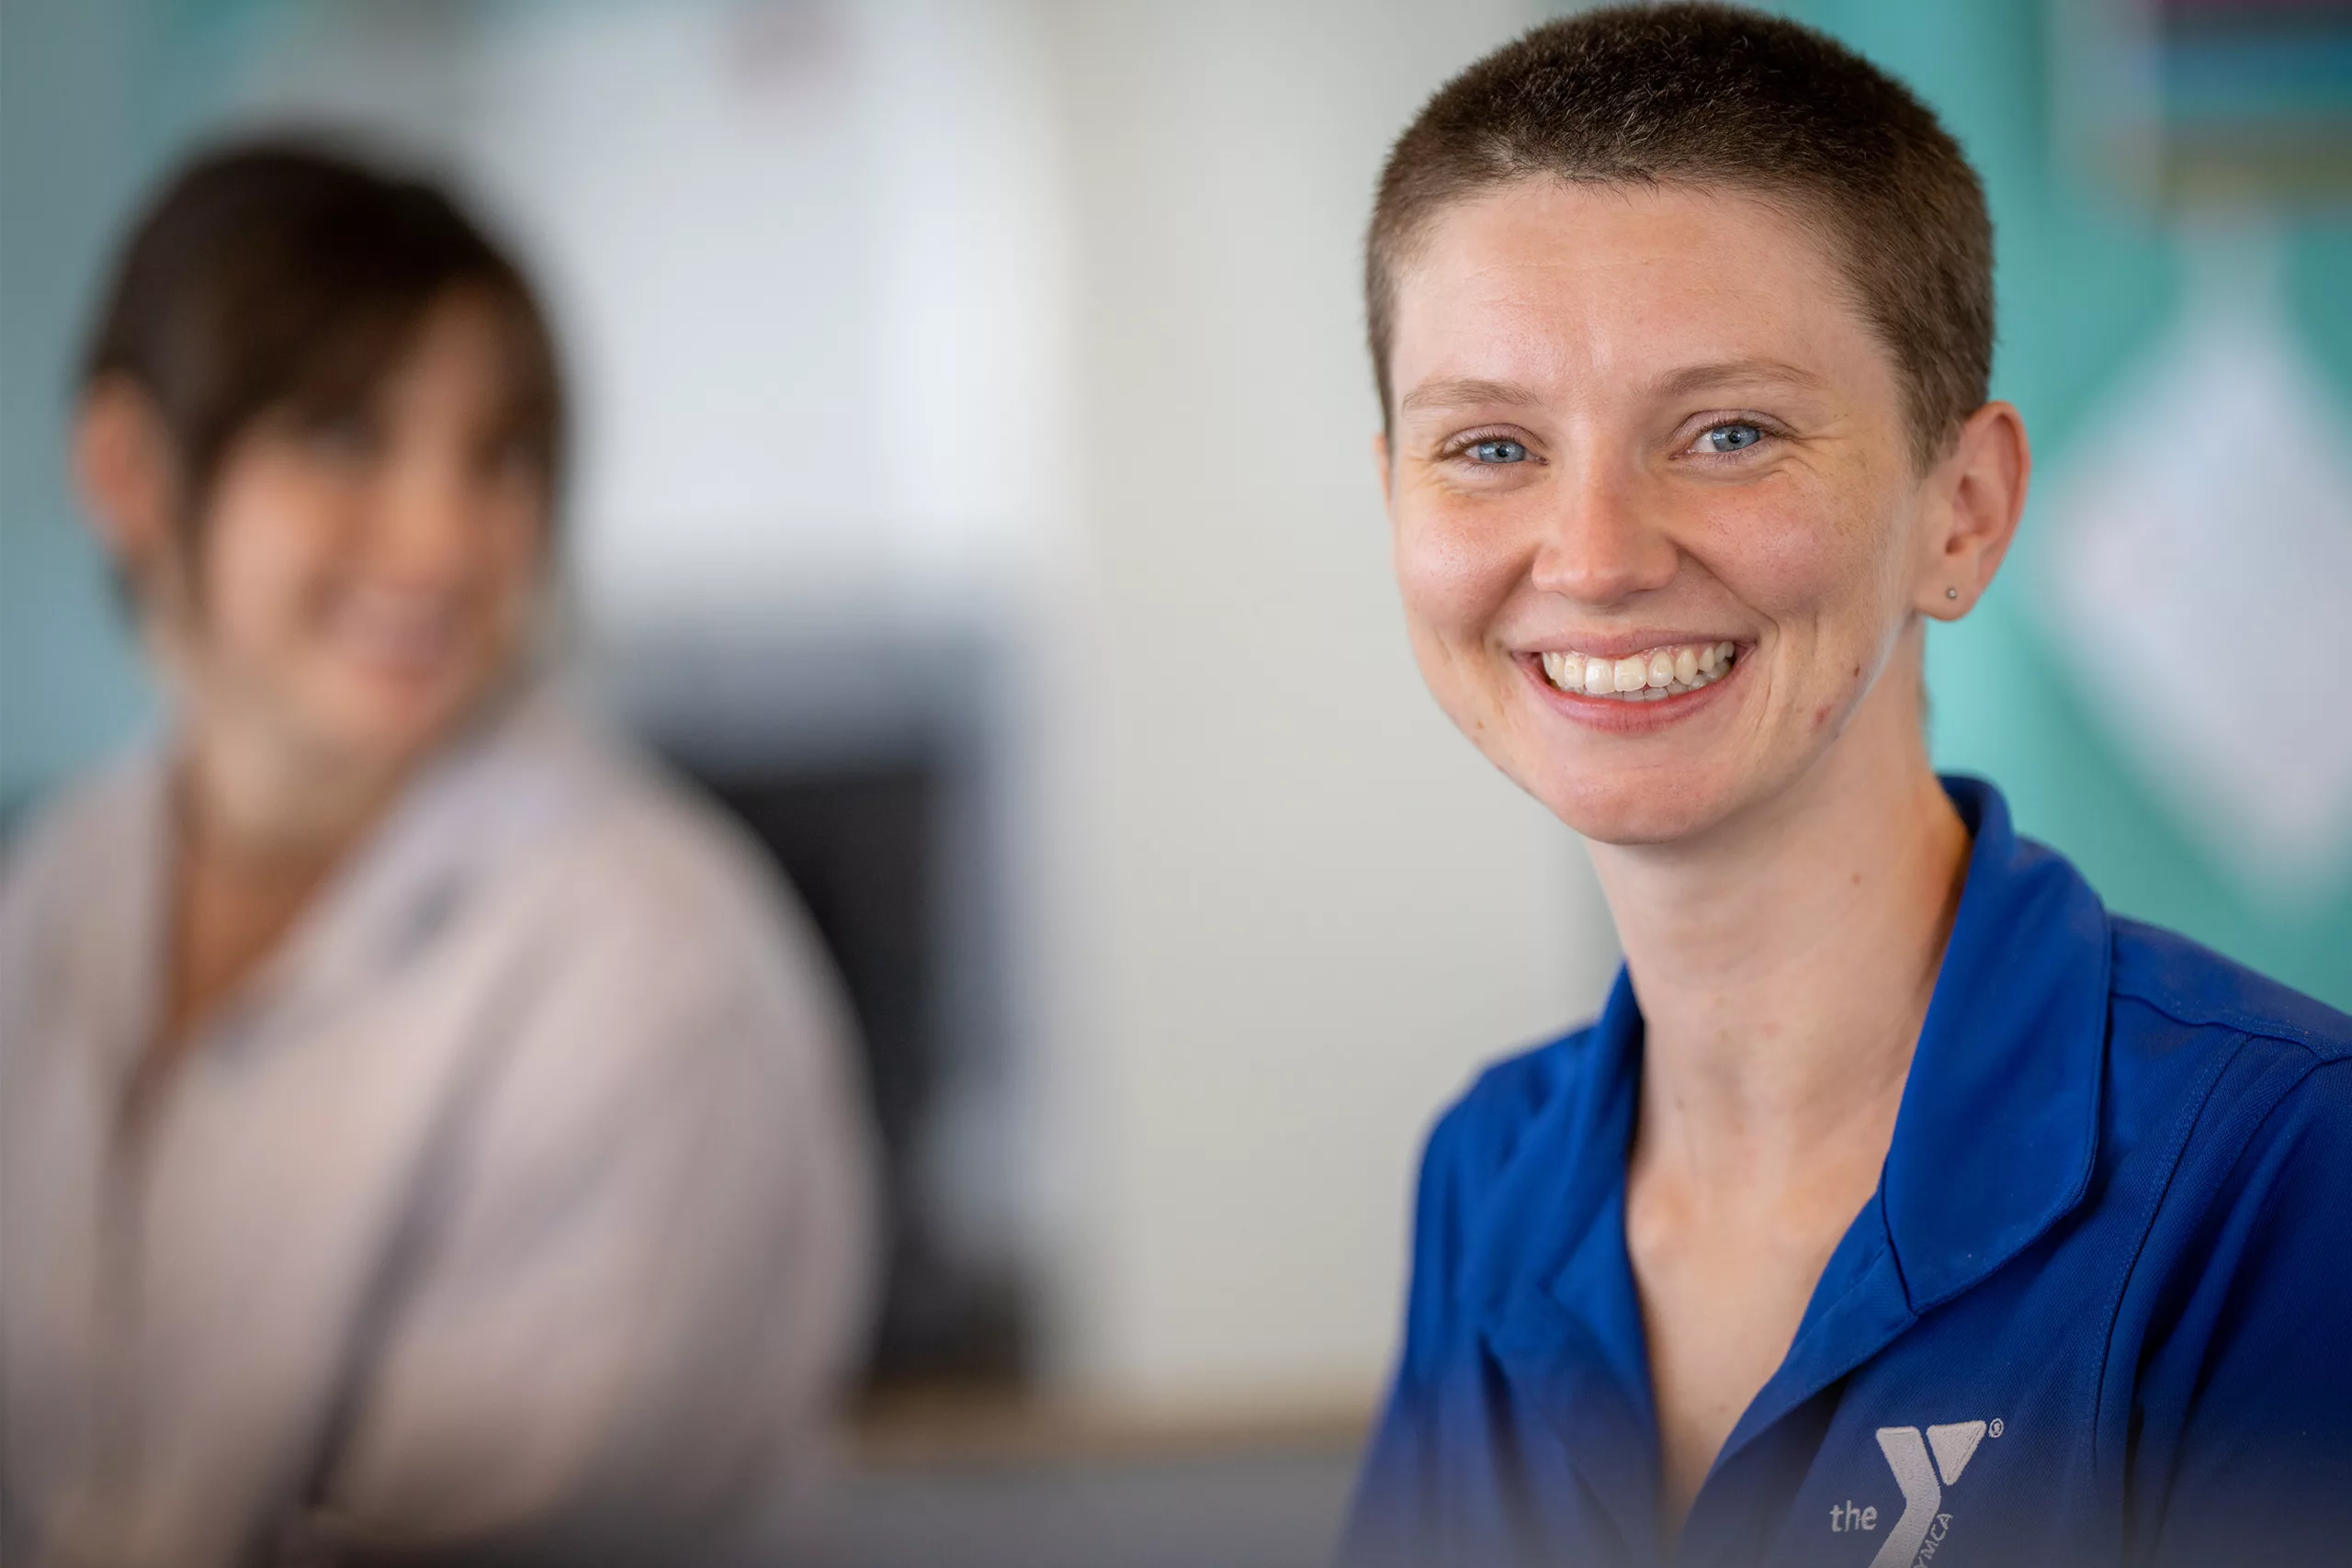 A YMCA staff member smiles and appears welcoming